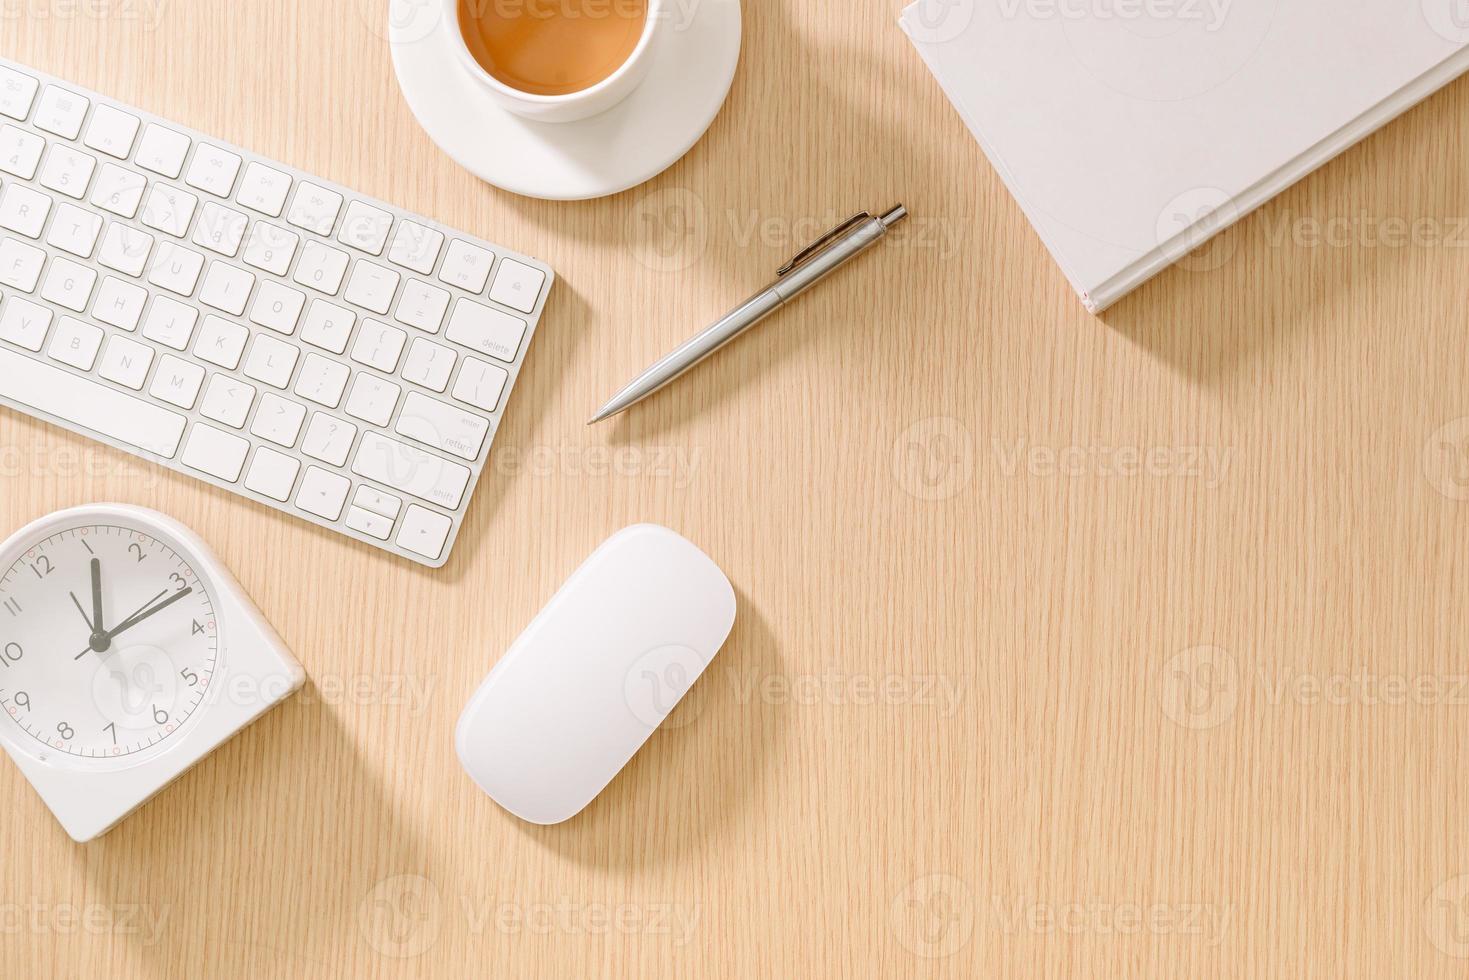 Modern white office desk with keyboard, mouse, oclock, book, pen and cup of coffee.Top view with copy paste. Business and strategy concept mockup. photo